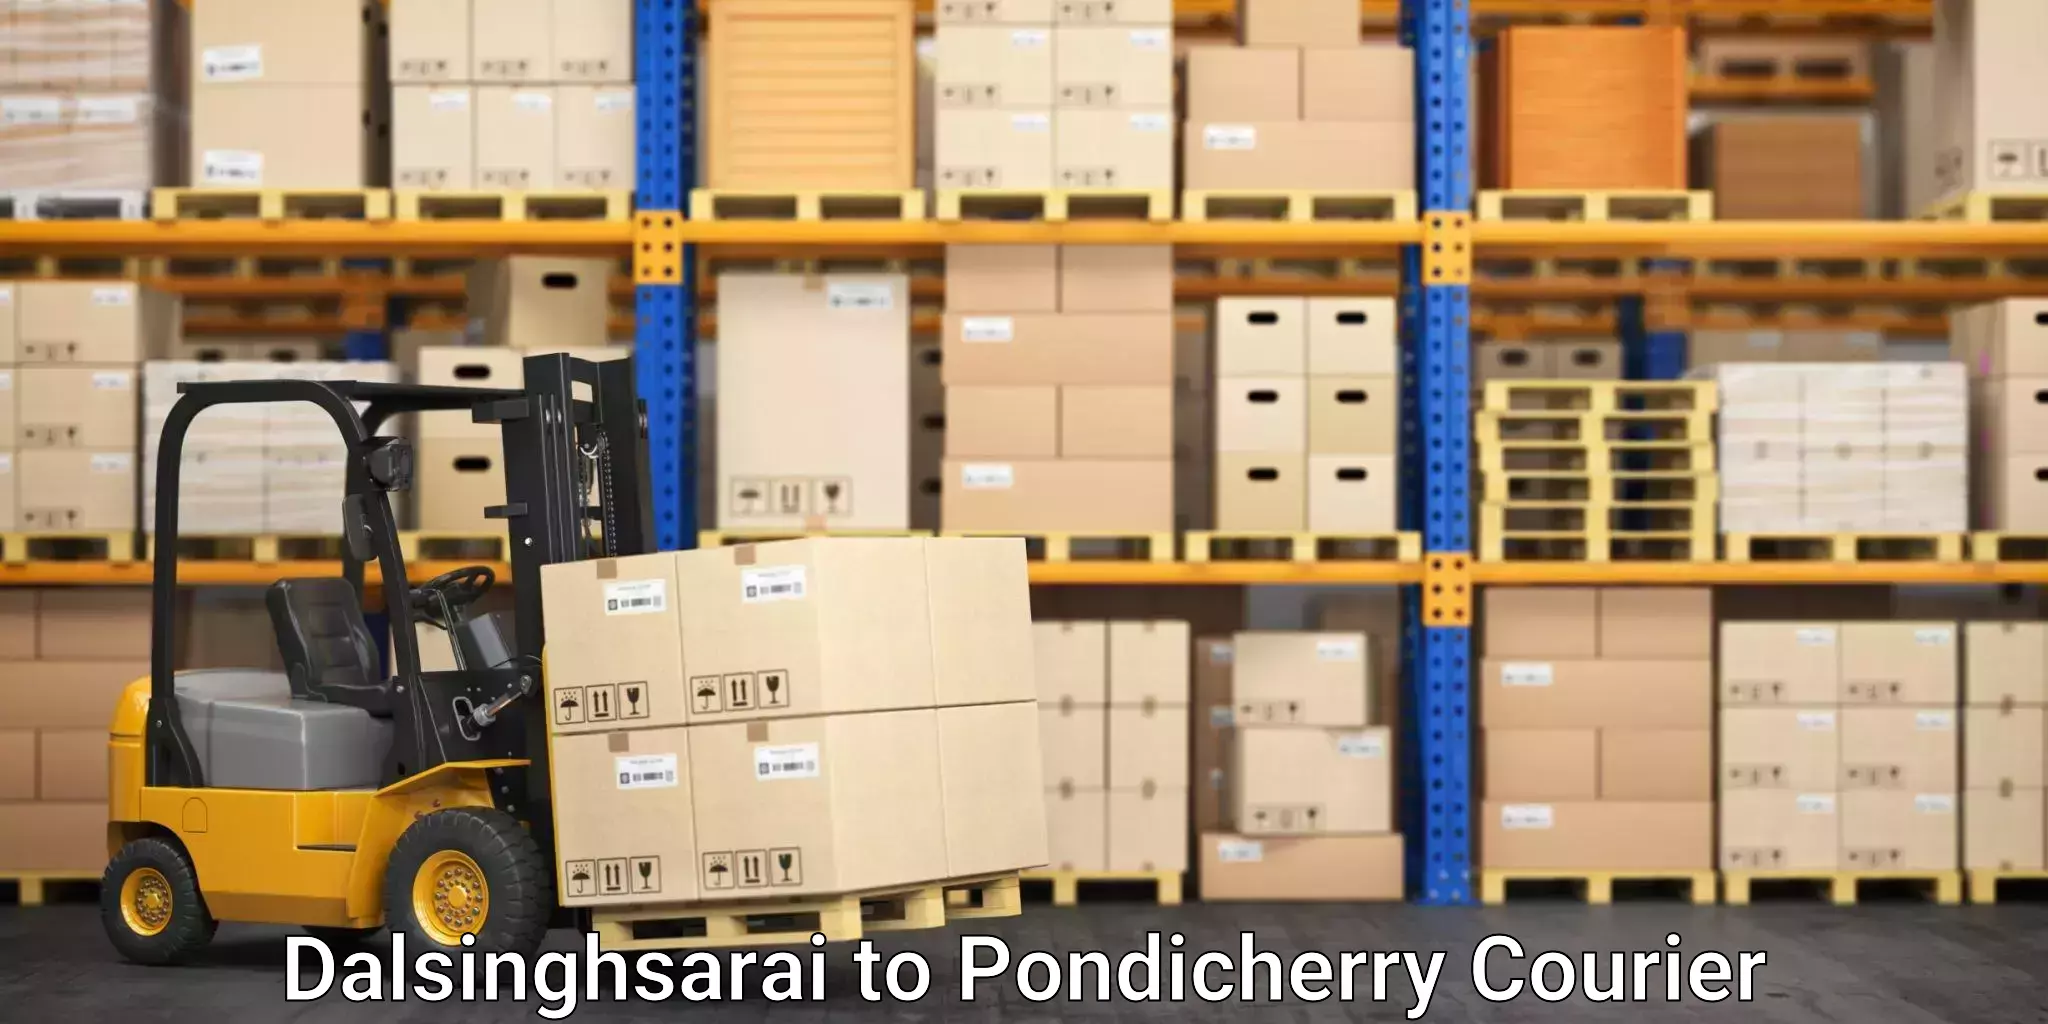 Moving and packing experts Dalsinghsarai to Pondicherry